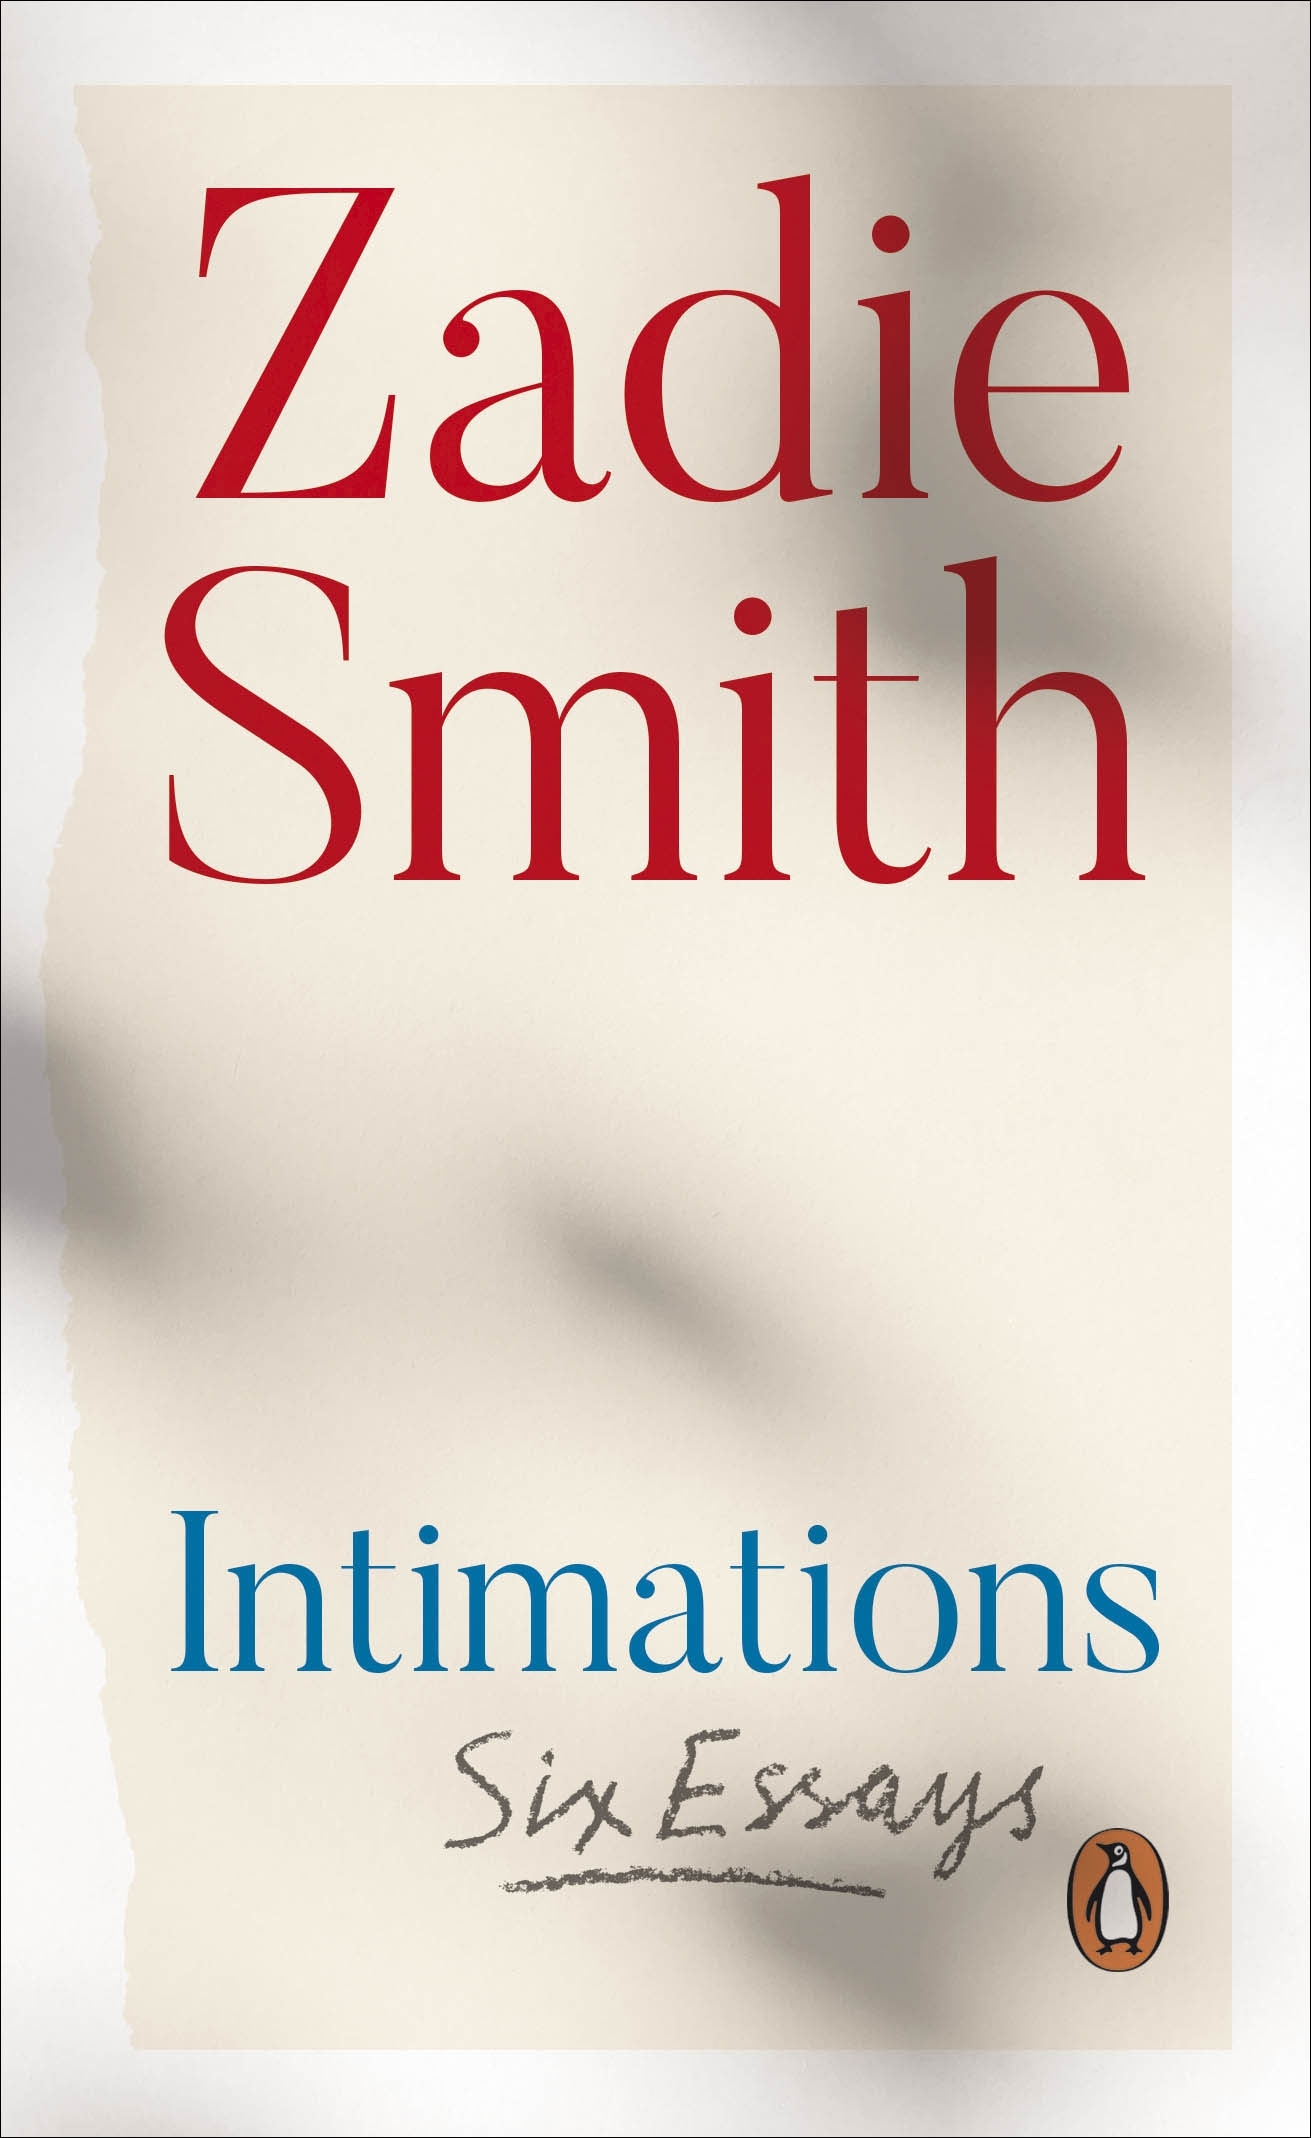 Book “Intimations” by Zadie Smith — August 6, 2020